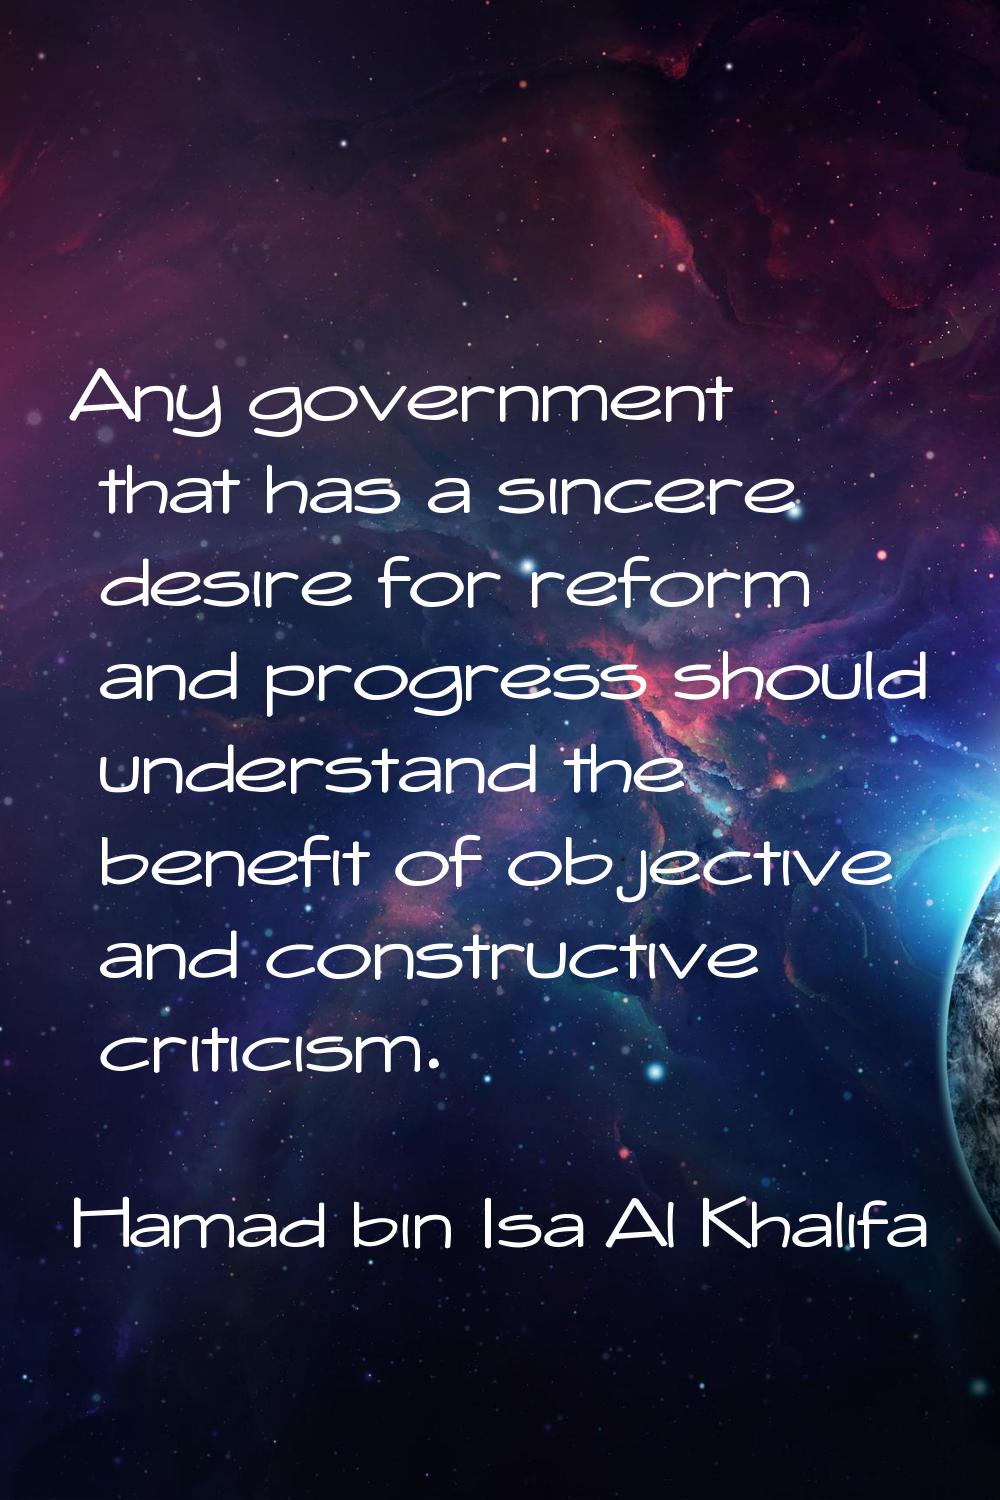 Any government that has a sincere desire for reform and progress should understand the benefit of o